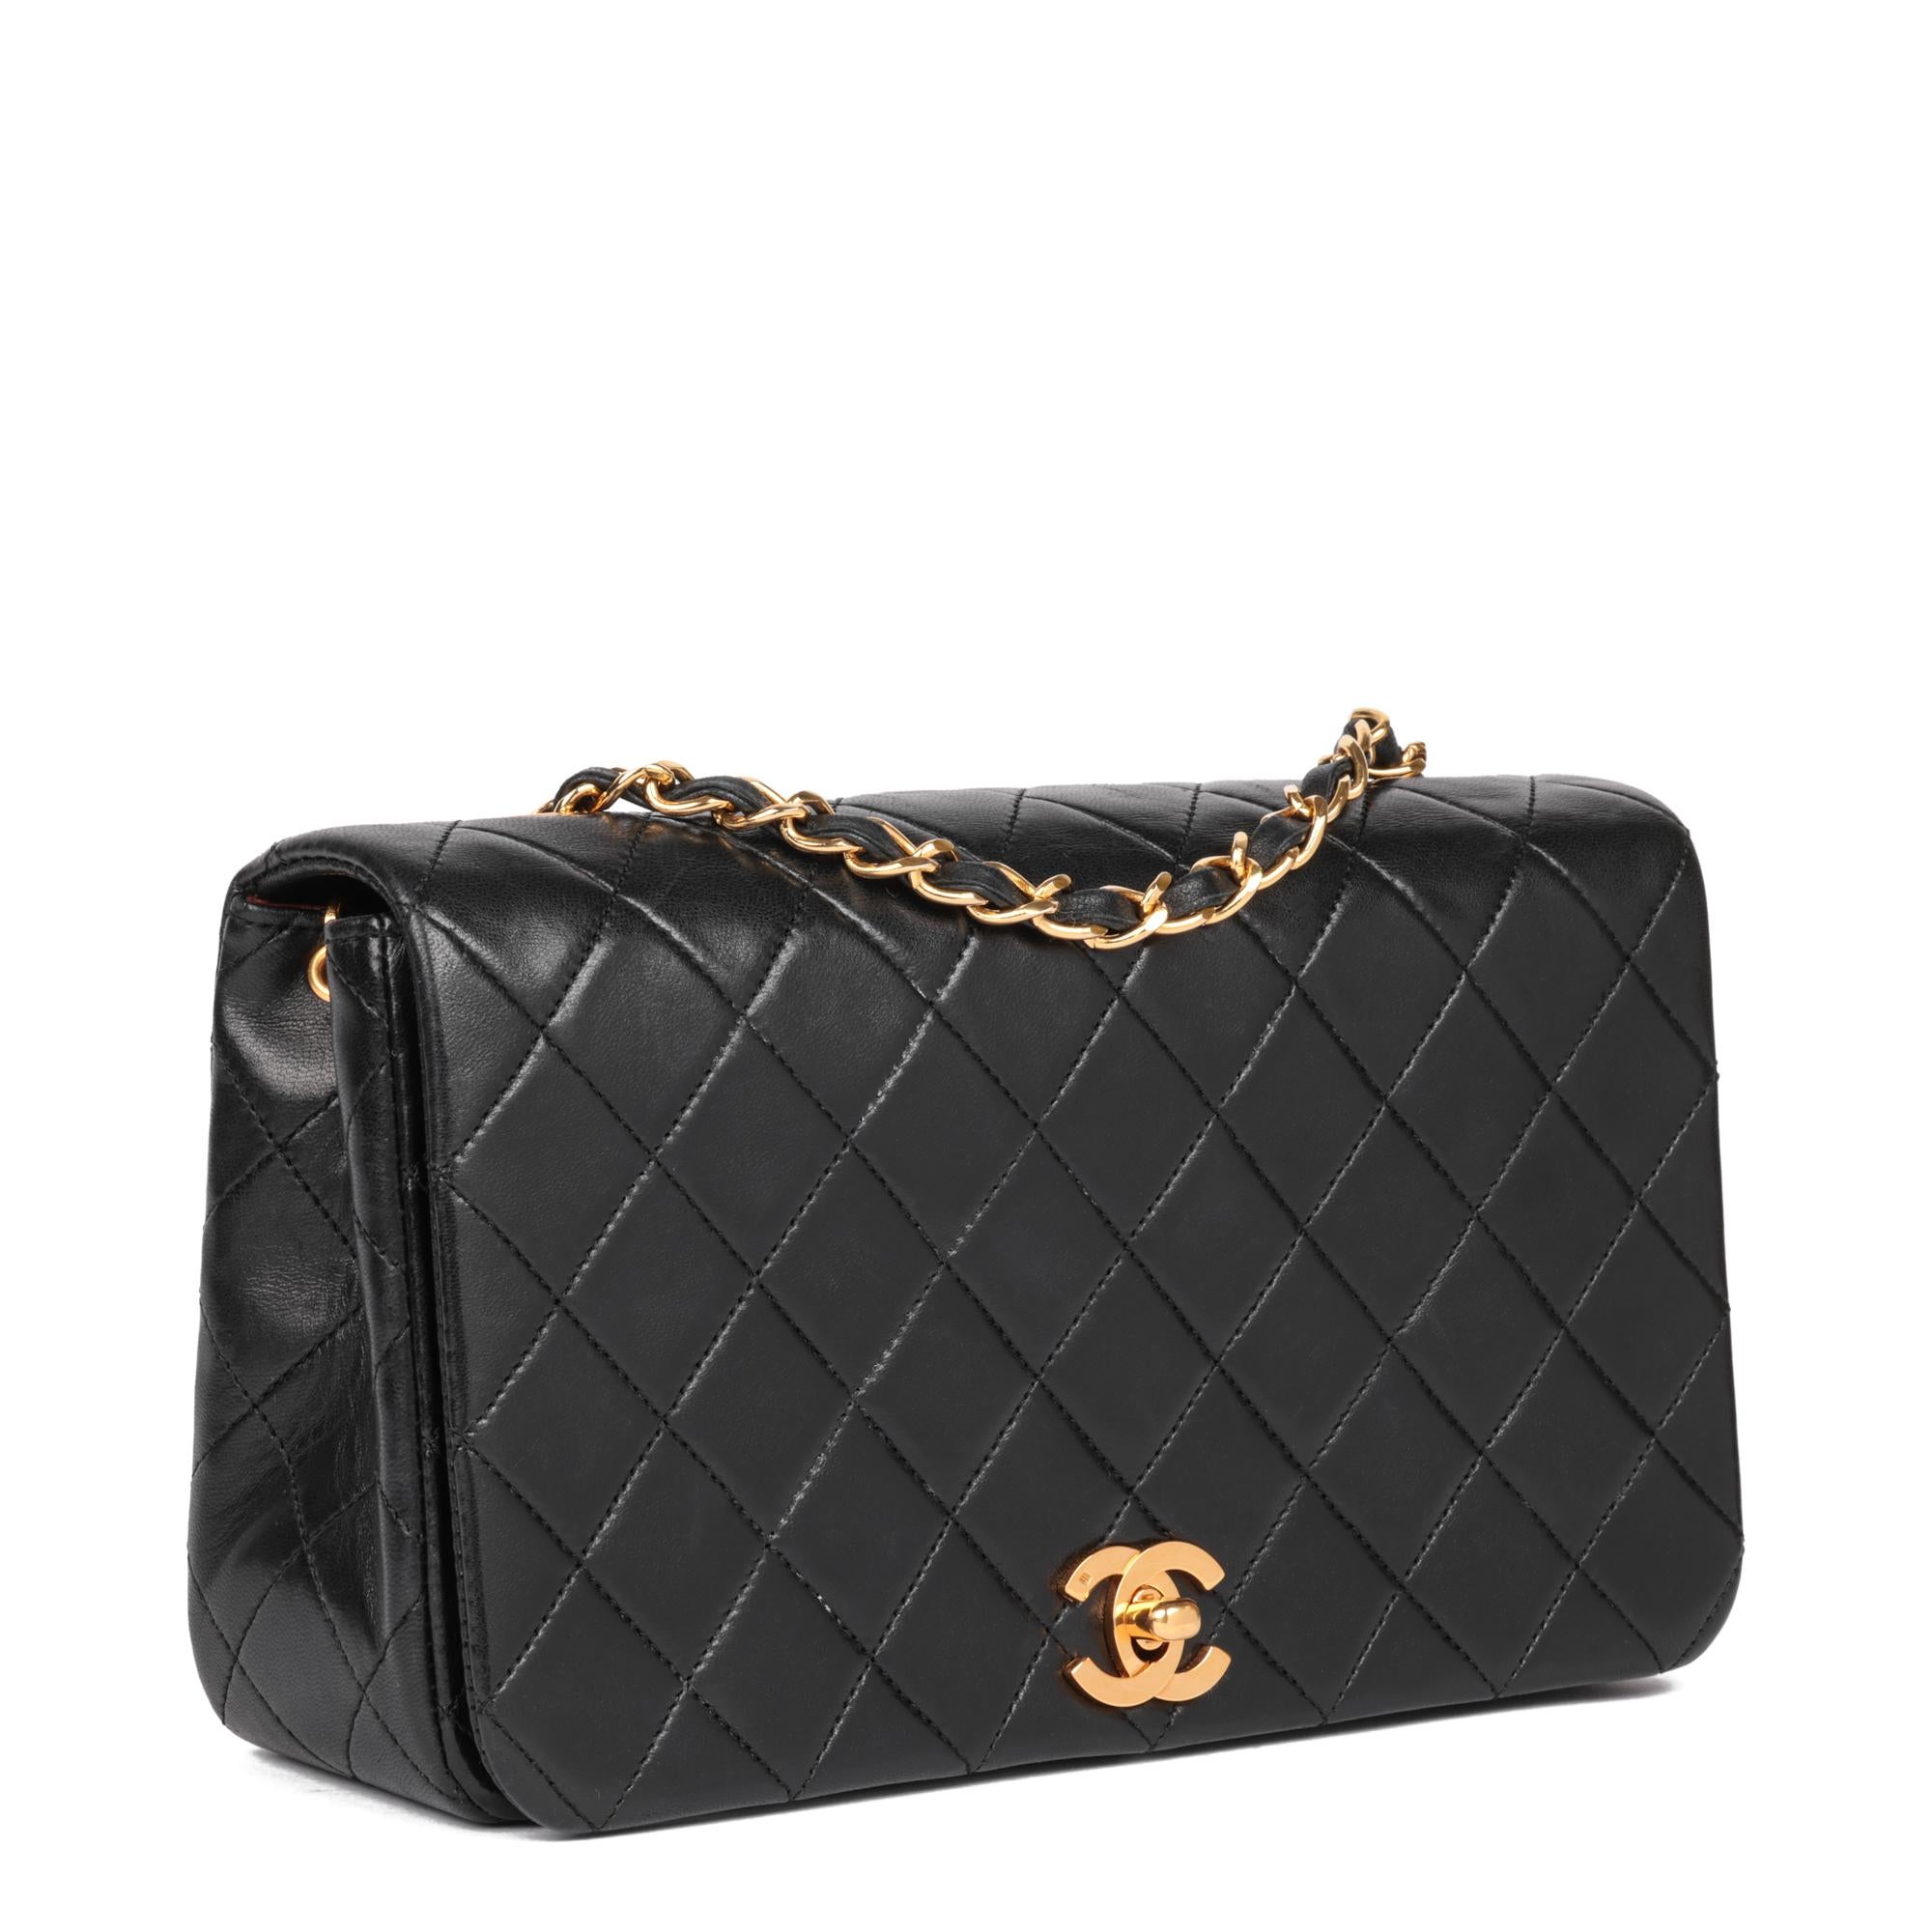 CHANEL
Black Quilted Lambskin Vintage Small Classic Single Full Flap Bag

Xupes Reference: HB5227
Serial Number: 1501005
Age (Circa): 1990
Accompanied By: Chanel Dust Bag, Authenticity Card
Authenticity Details: Authenticity Card, Serial Sticker